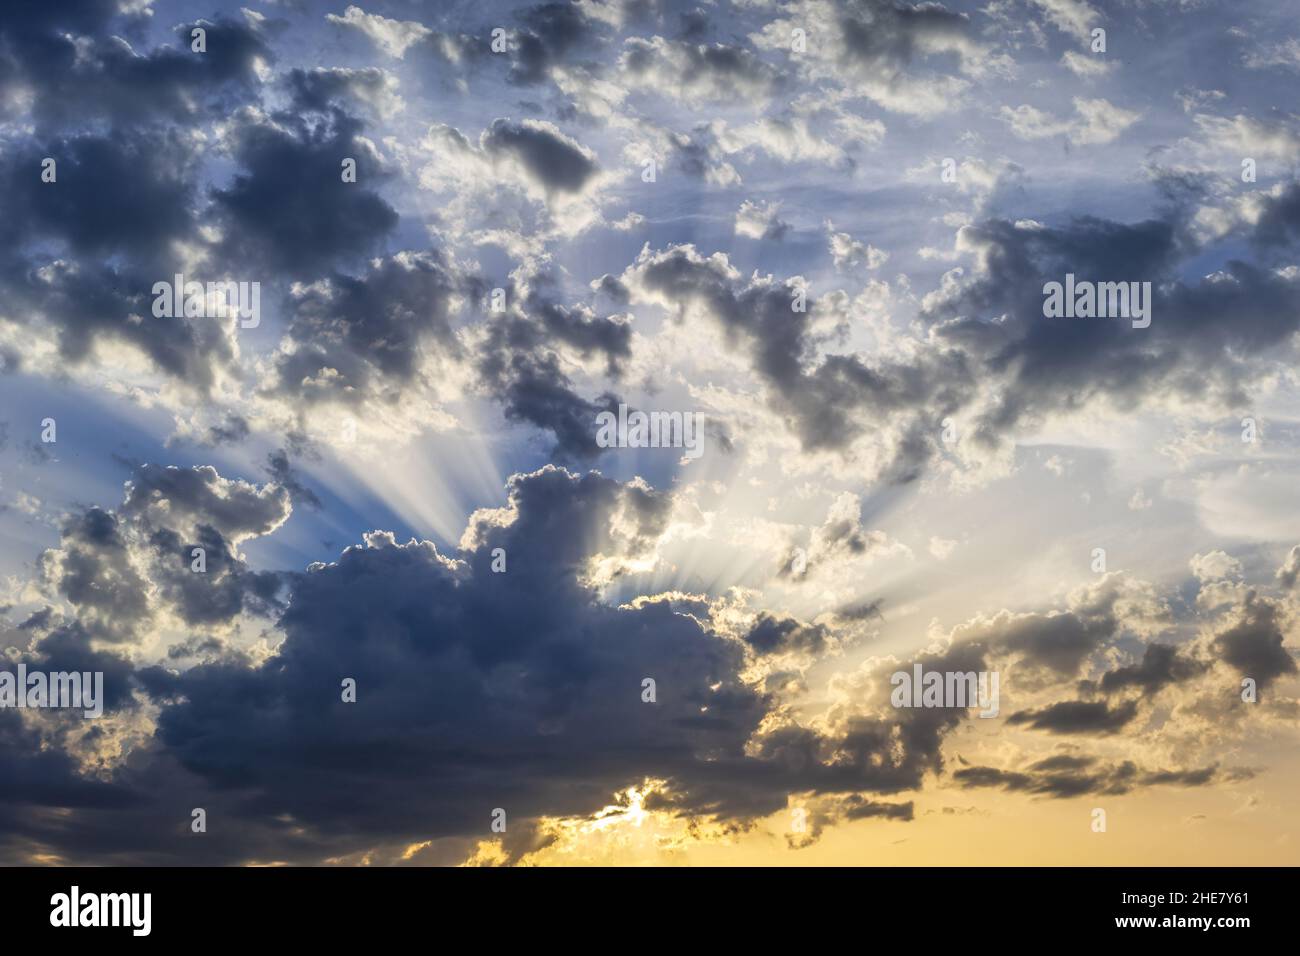 Cloud mood in the evening sky, Bavaria, Germany Stock Photo